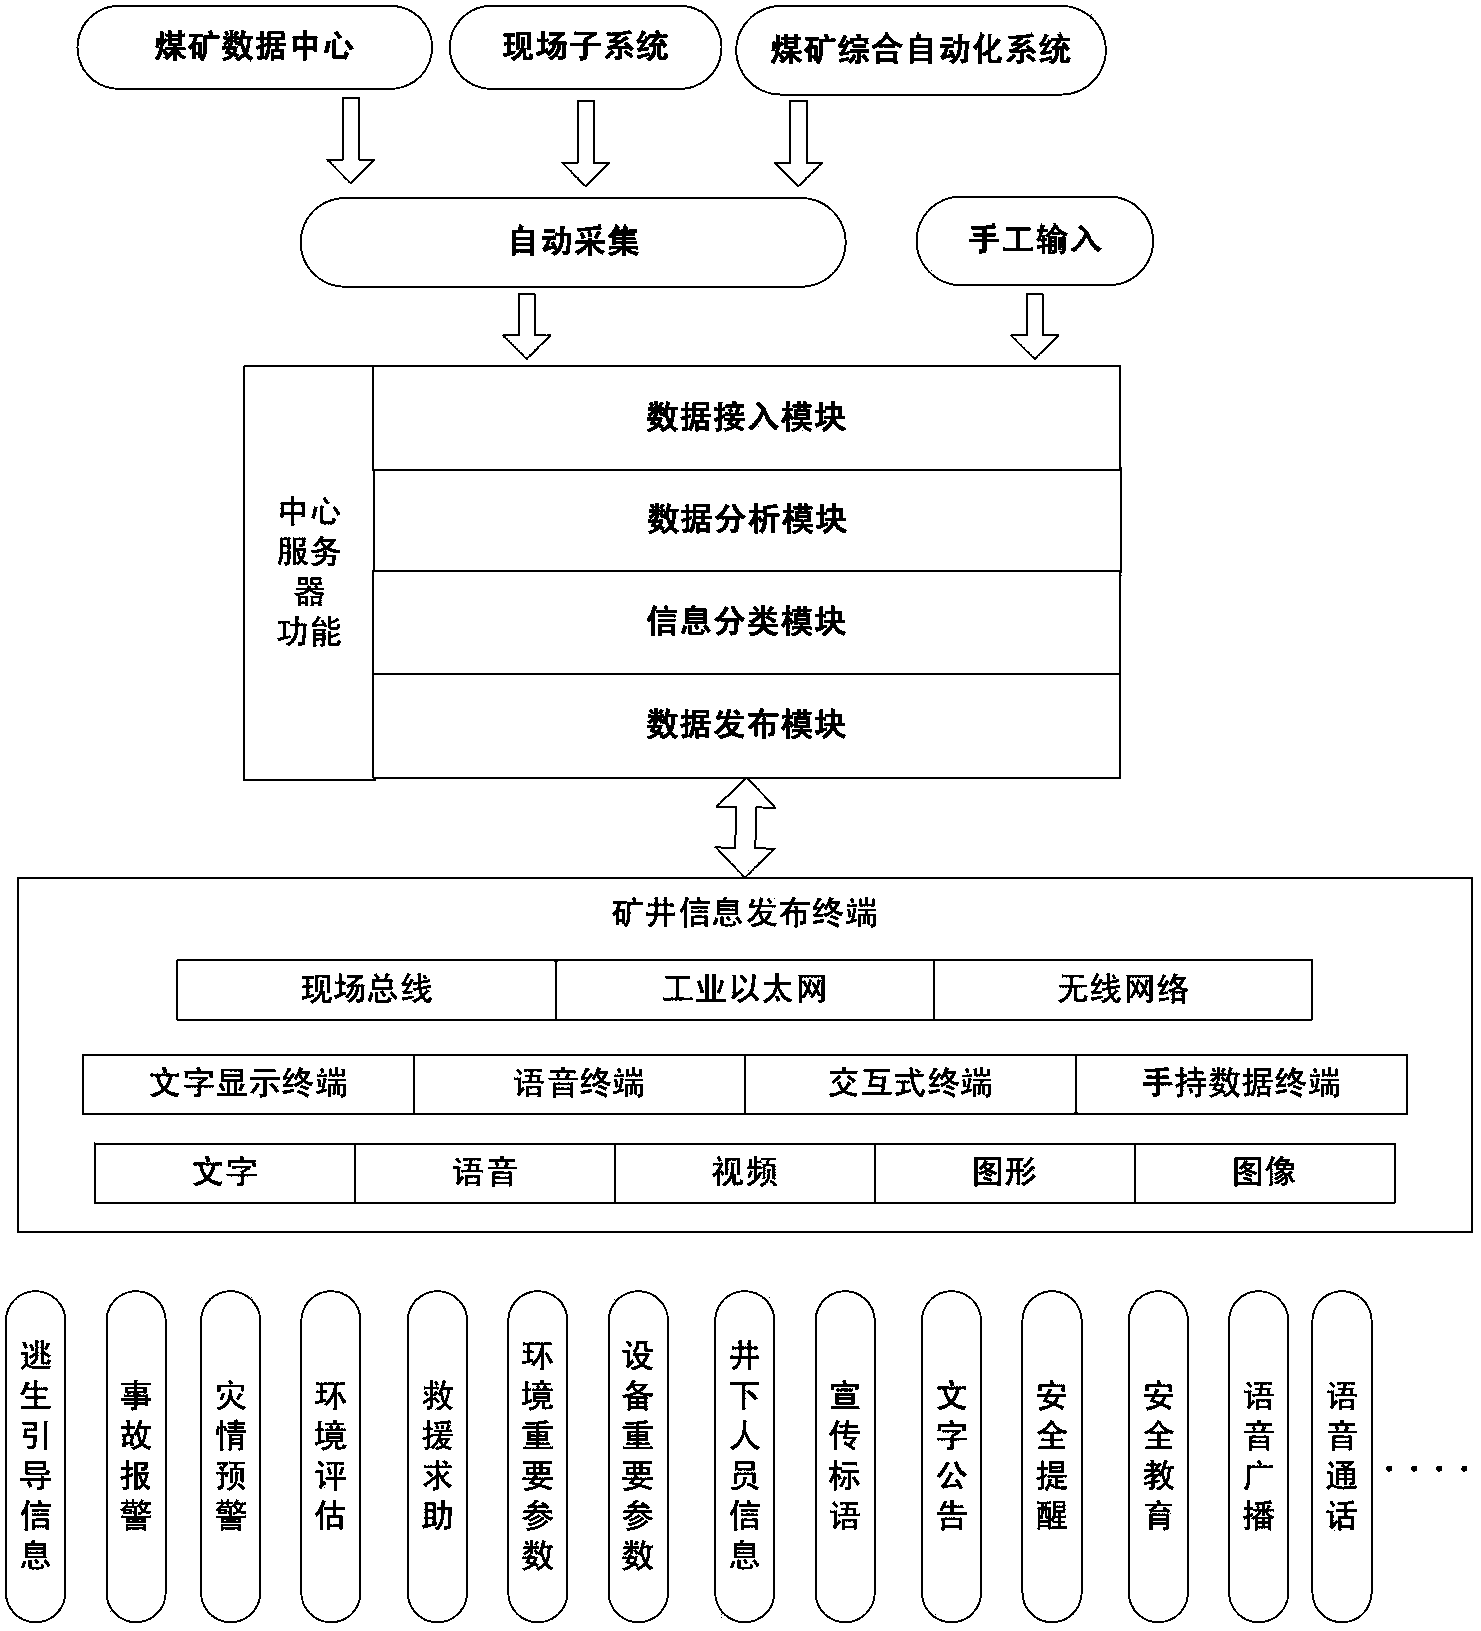 Coal mine multimedia comprehensive information issuing system